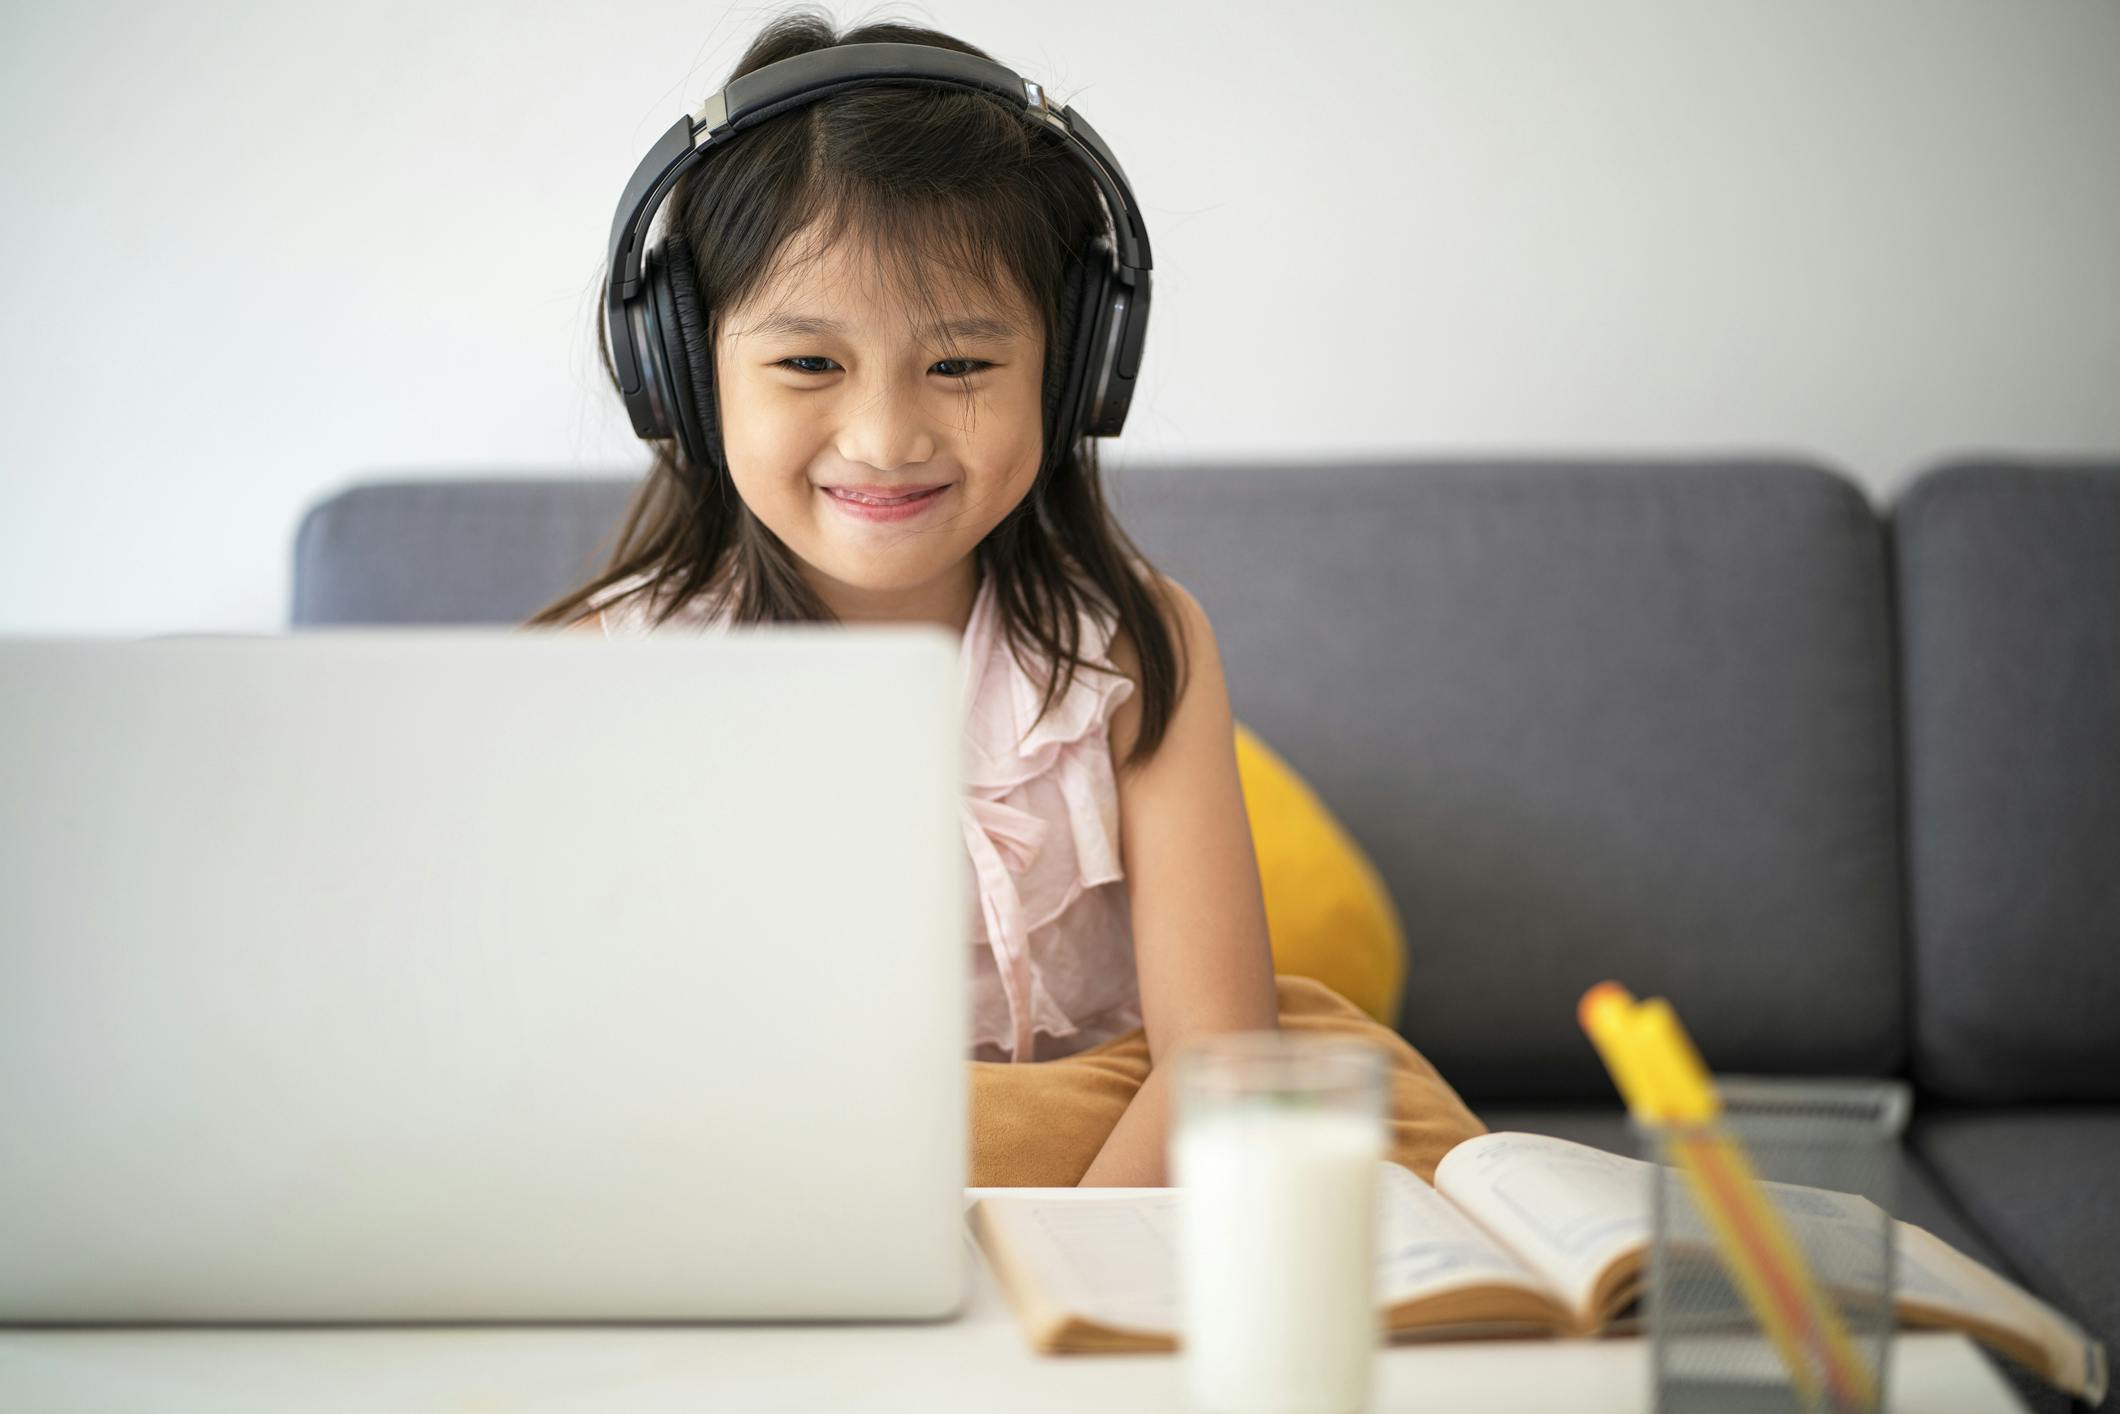 child sitting on couch with headphones on, smiling and learning on a laptop. 